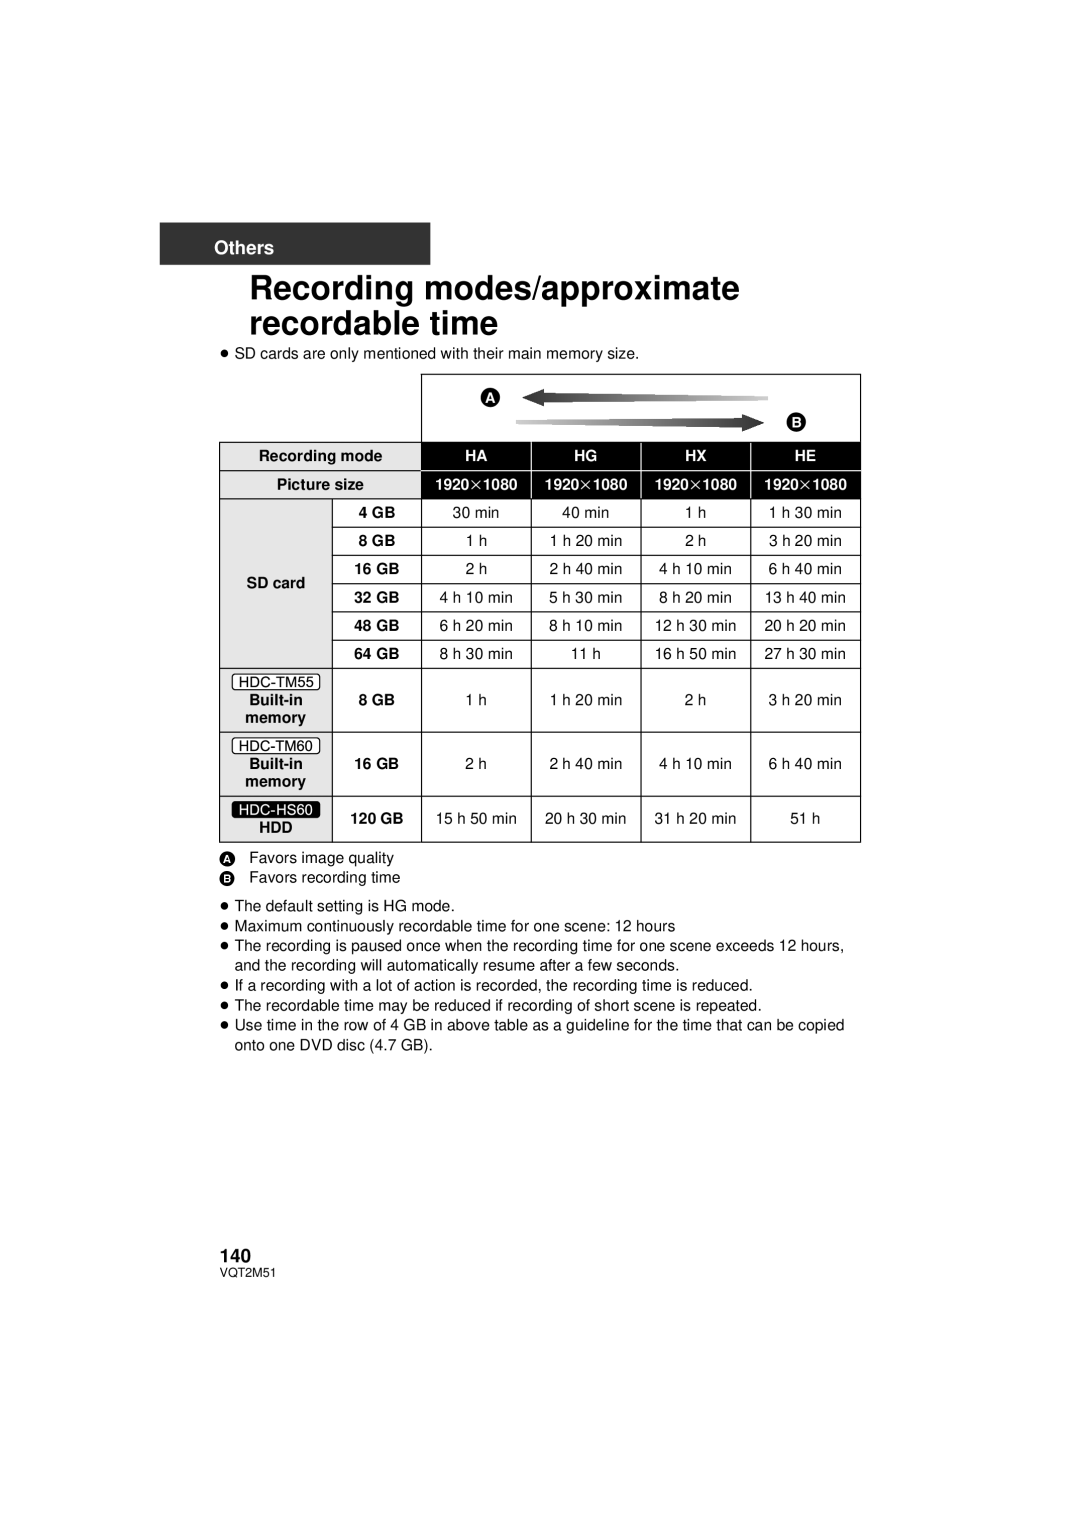 Panasonic HDC-SD60P/PC, HDC-TM60P/PC Recording modes/approximate recordable time, Others, 4 GB, 8 GB, Built-in, memory 